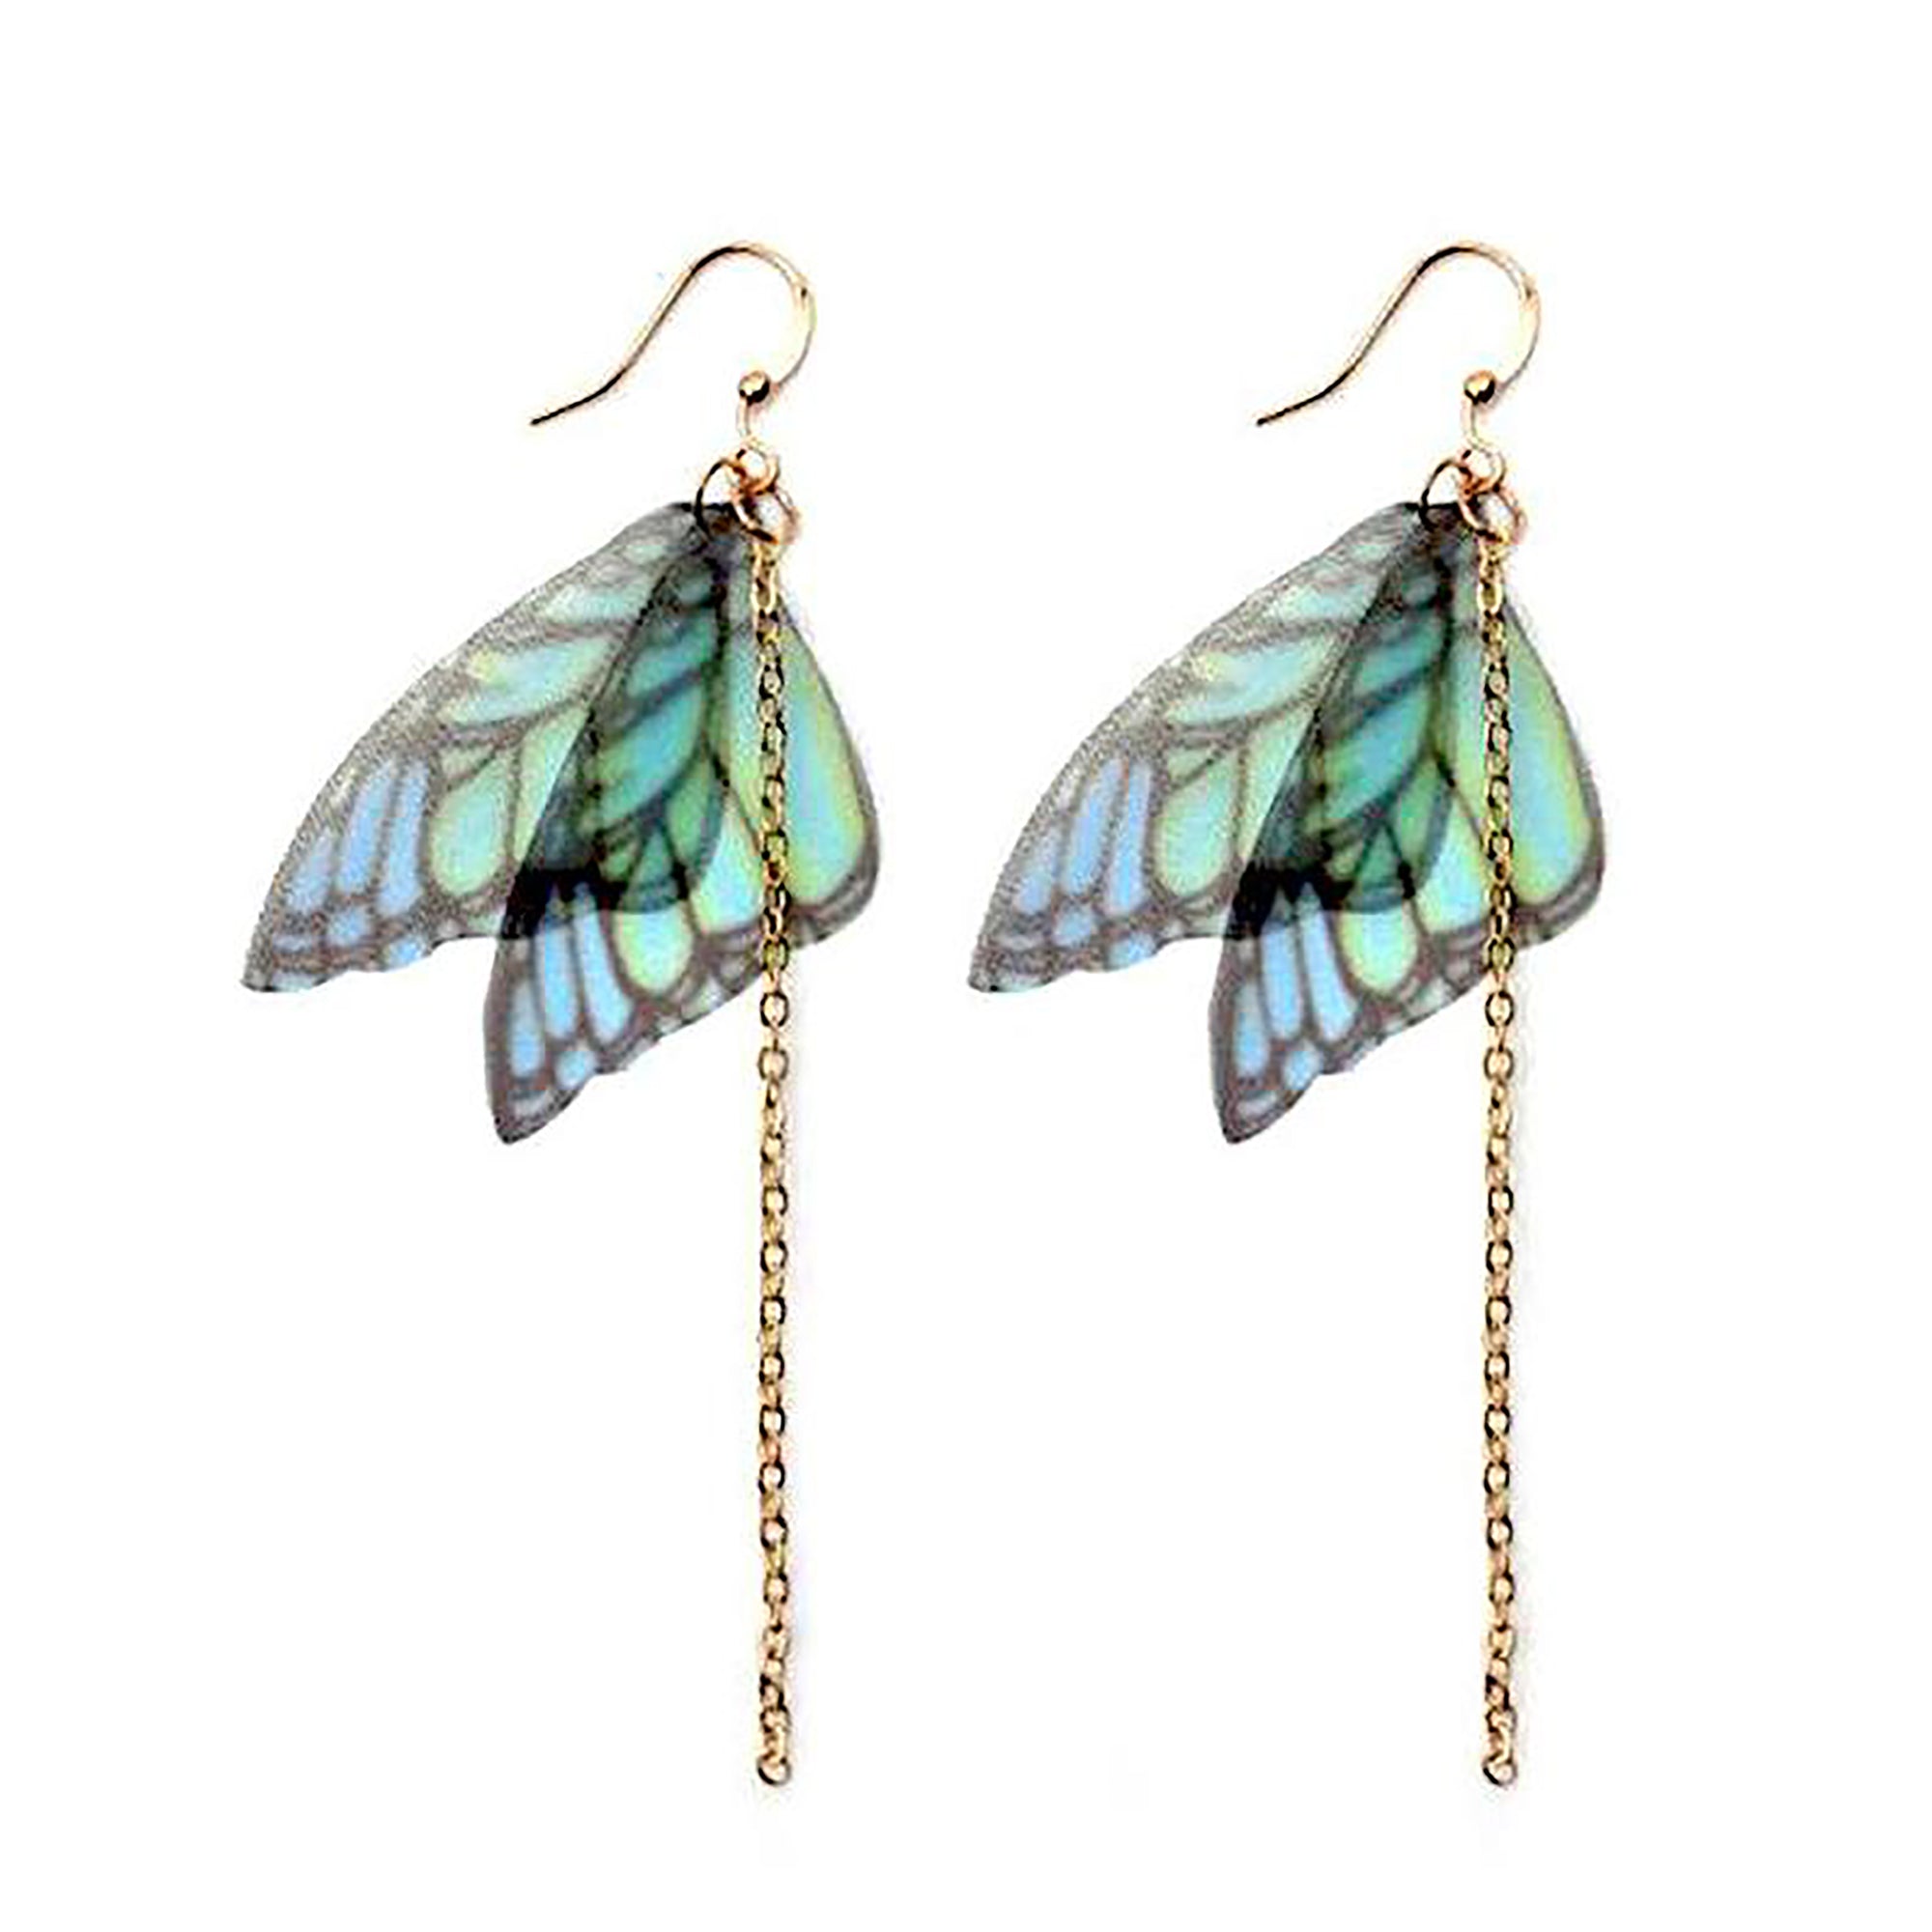 Real Blue Morpho Butterfly Wing Earrings Real Butterfly Earrings Butterfly  Wing Jewelry Blue Butterfly Wings Earrings Butterflies - Etsy | Butterfly  wing earrings, Real butterfly earrings, Butterfly wing jewelry